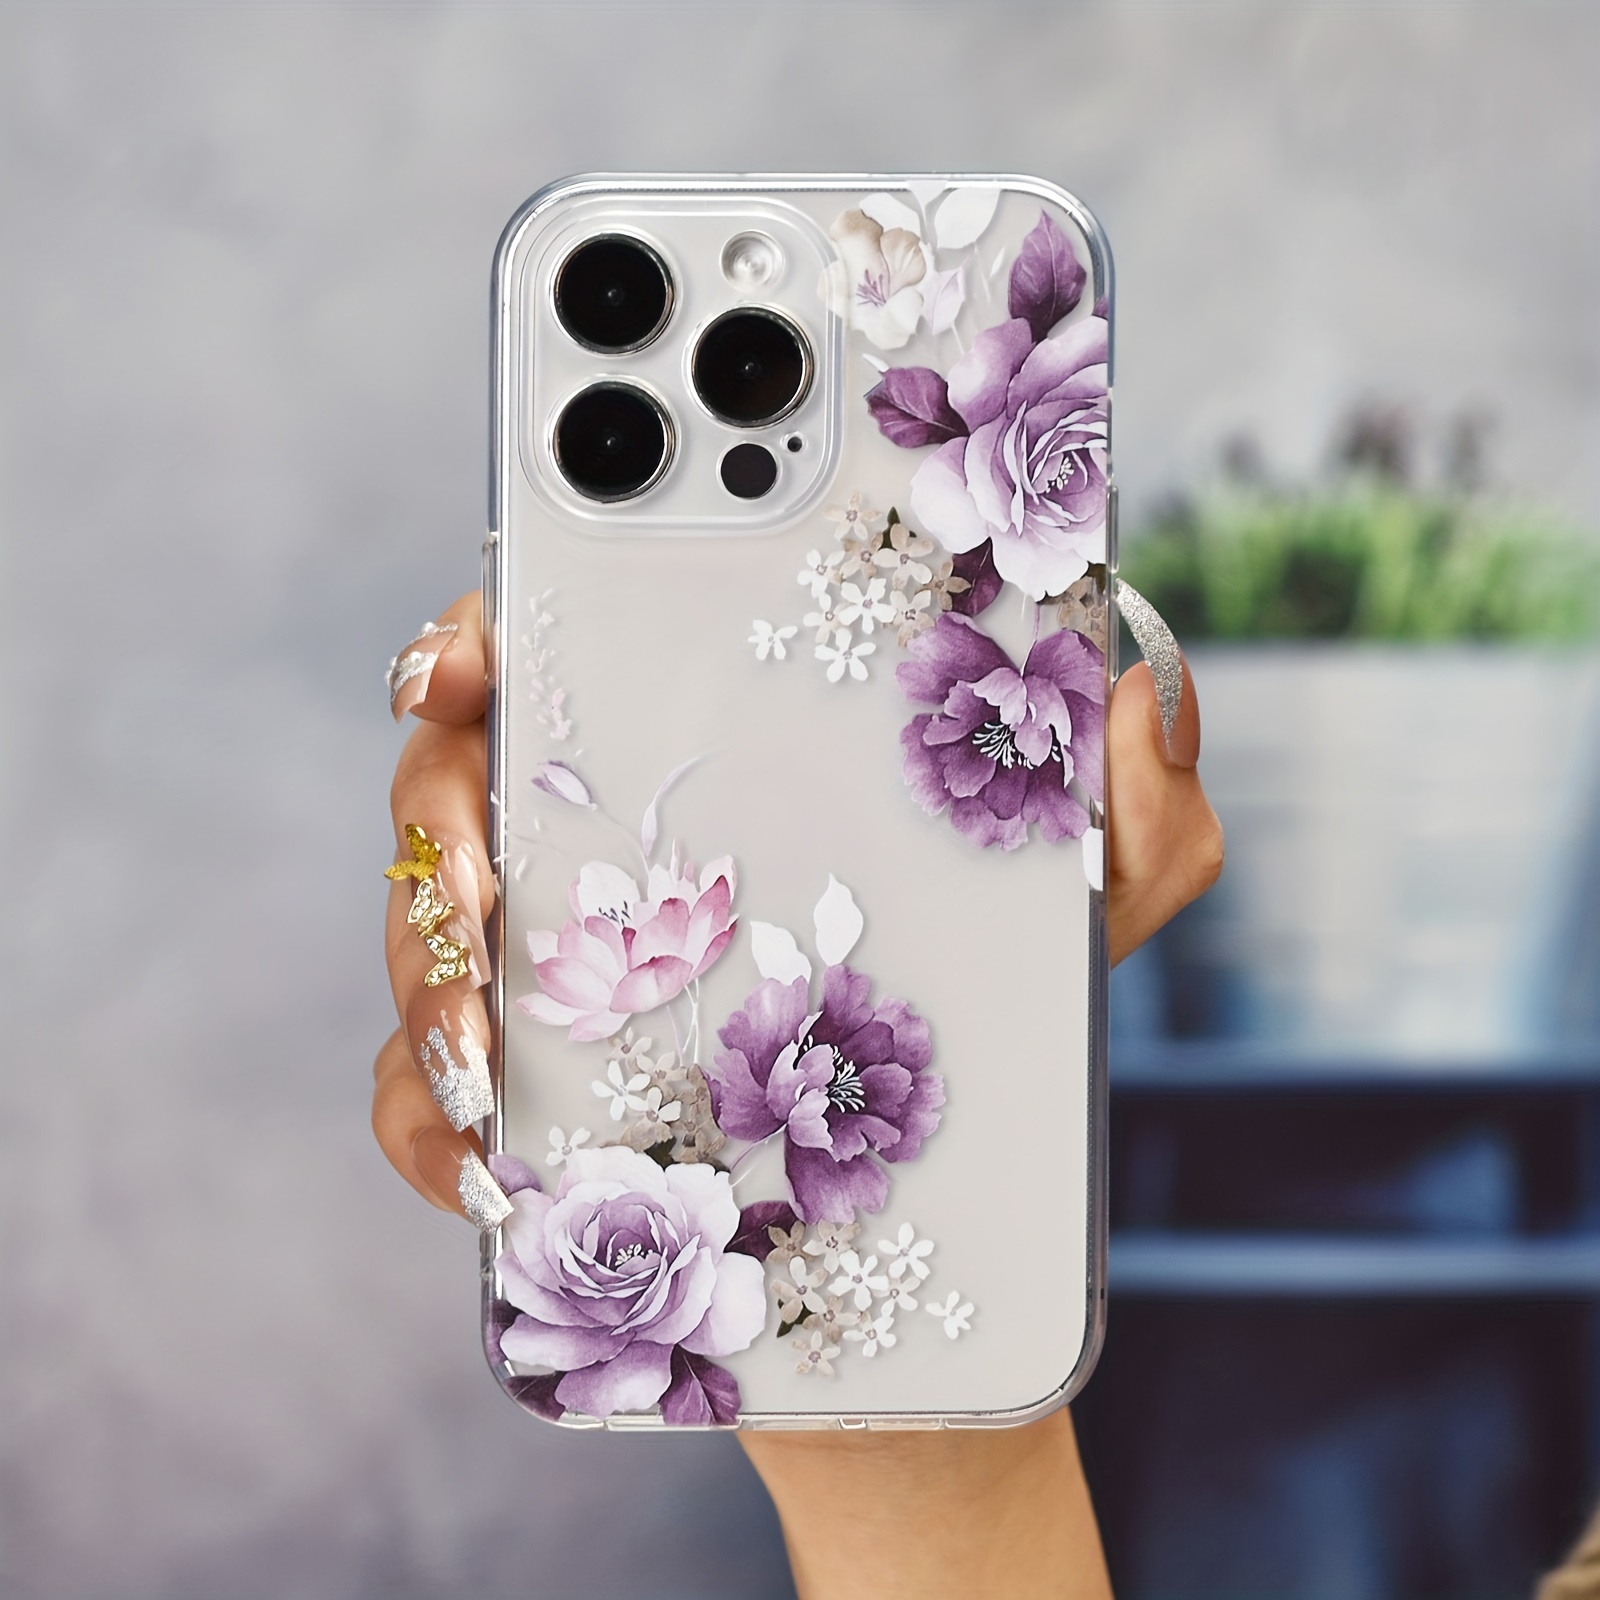 

Premium Shockproof Slim Protective Phone Case With Flowers Pattern Design - All-inclusive Protection For Iphone 7/8/11/12/13/14/x/xr/xs/plus/pro/pro Max/se2/mini Series - Perfect Gift For Men, Women